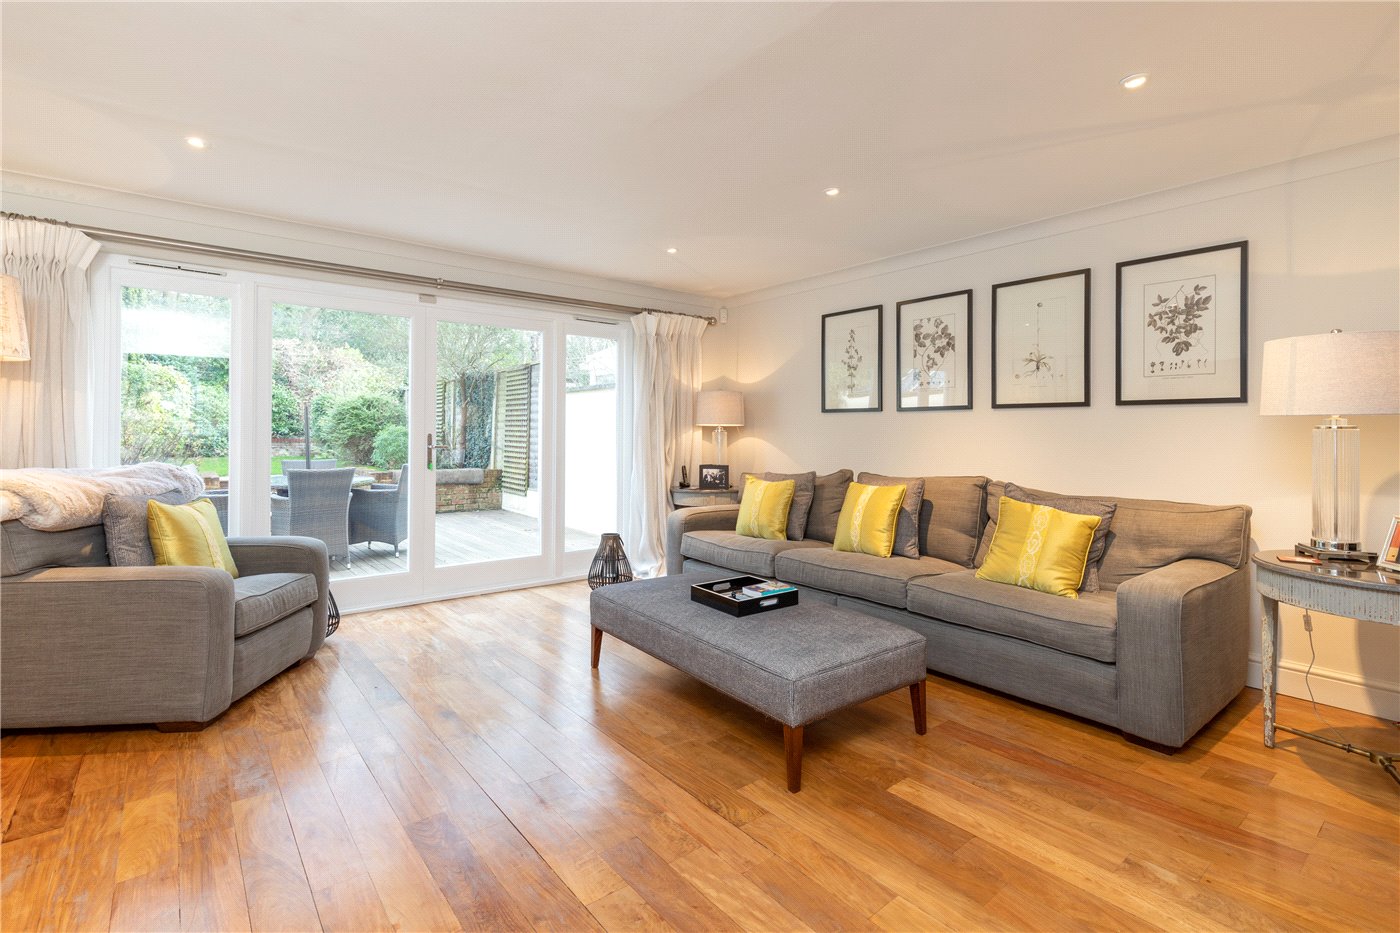 3 bedroom terraced house for sale in London